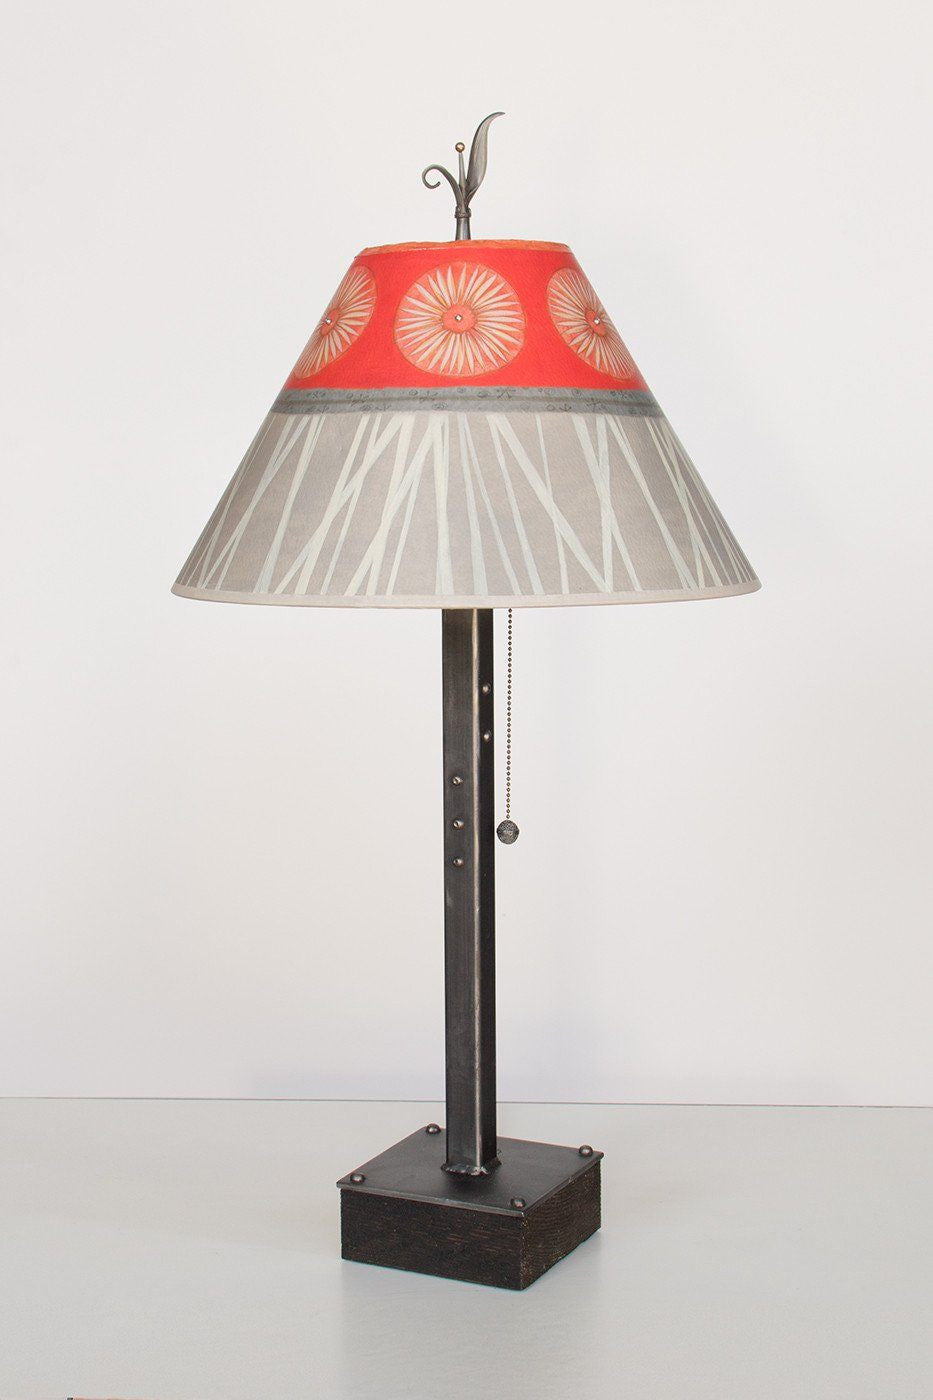 Janna Ugone & Co Table Lamps Steel Table Lamp on Wood with Medium Conical Shade in Tang